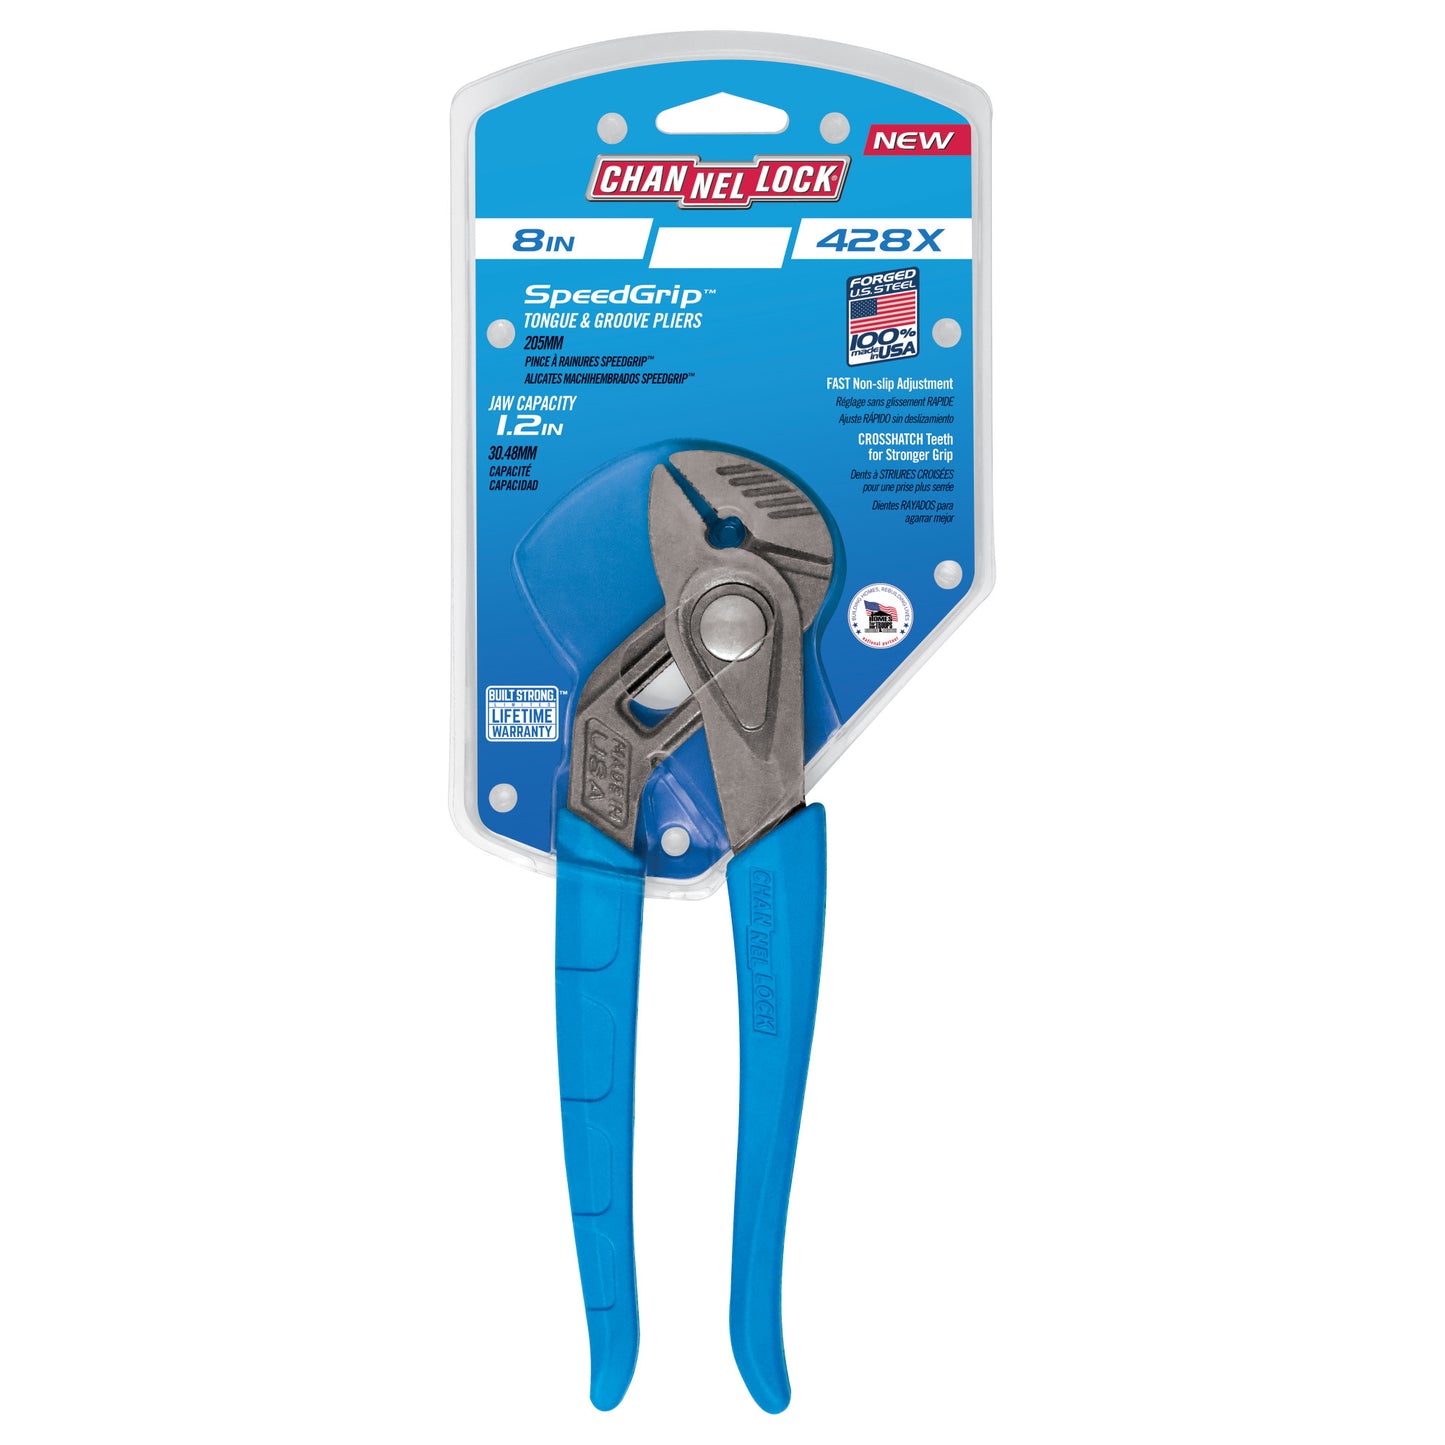 8-inch SPEEDGRIP Straight Jaw Tongue & Groove Pliers (428X)